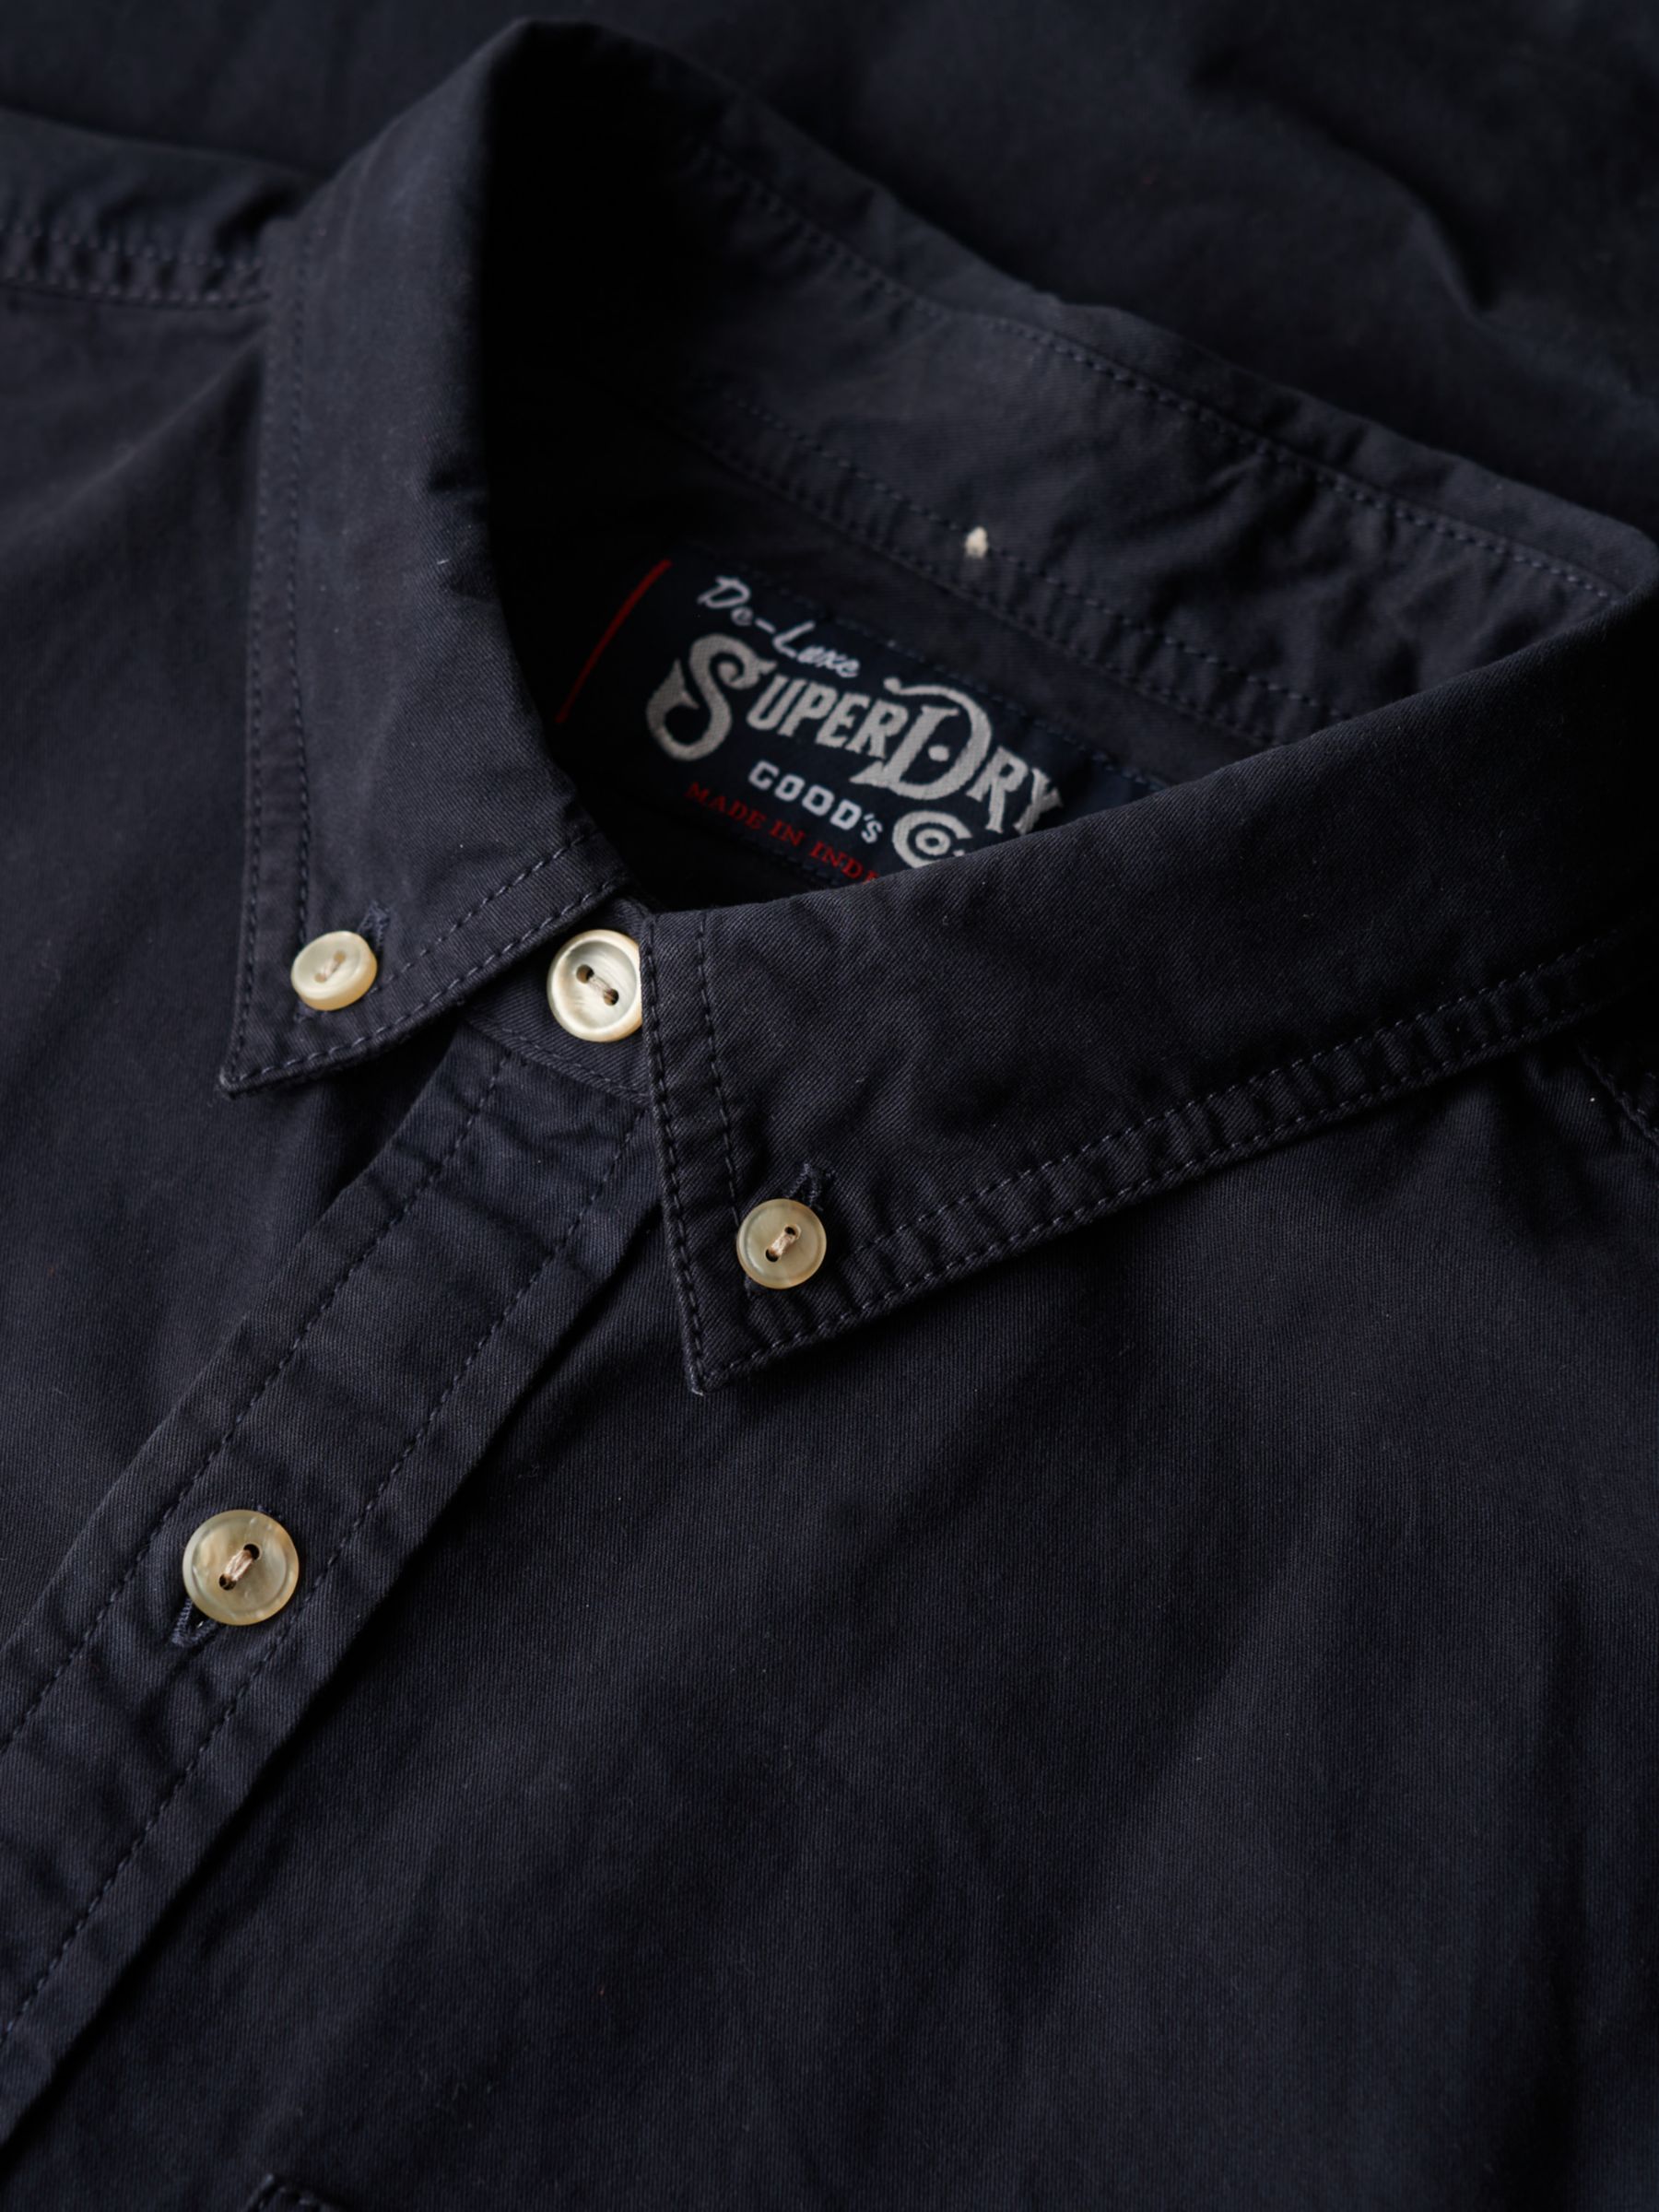 Buy Superdry The Merchant Store Cotton Long Sleeve Shirt Online at johnlewis.com